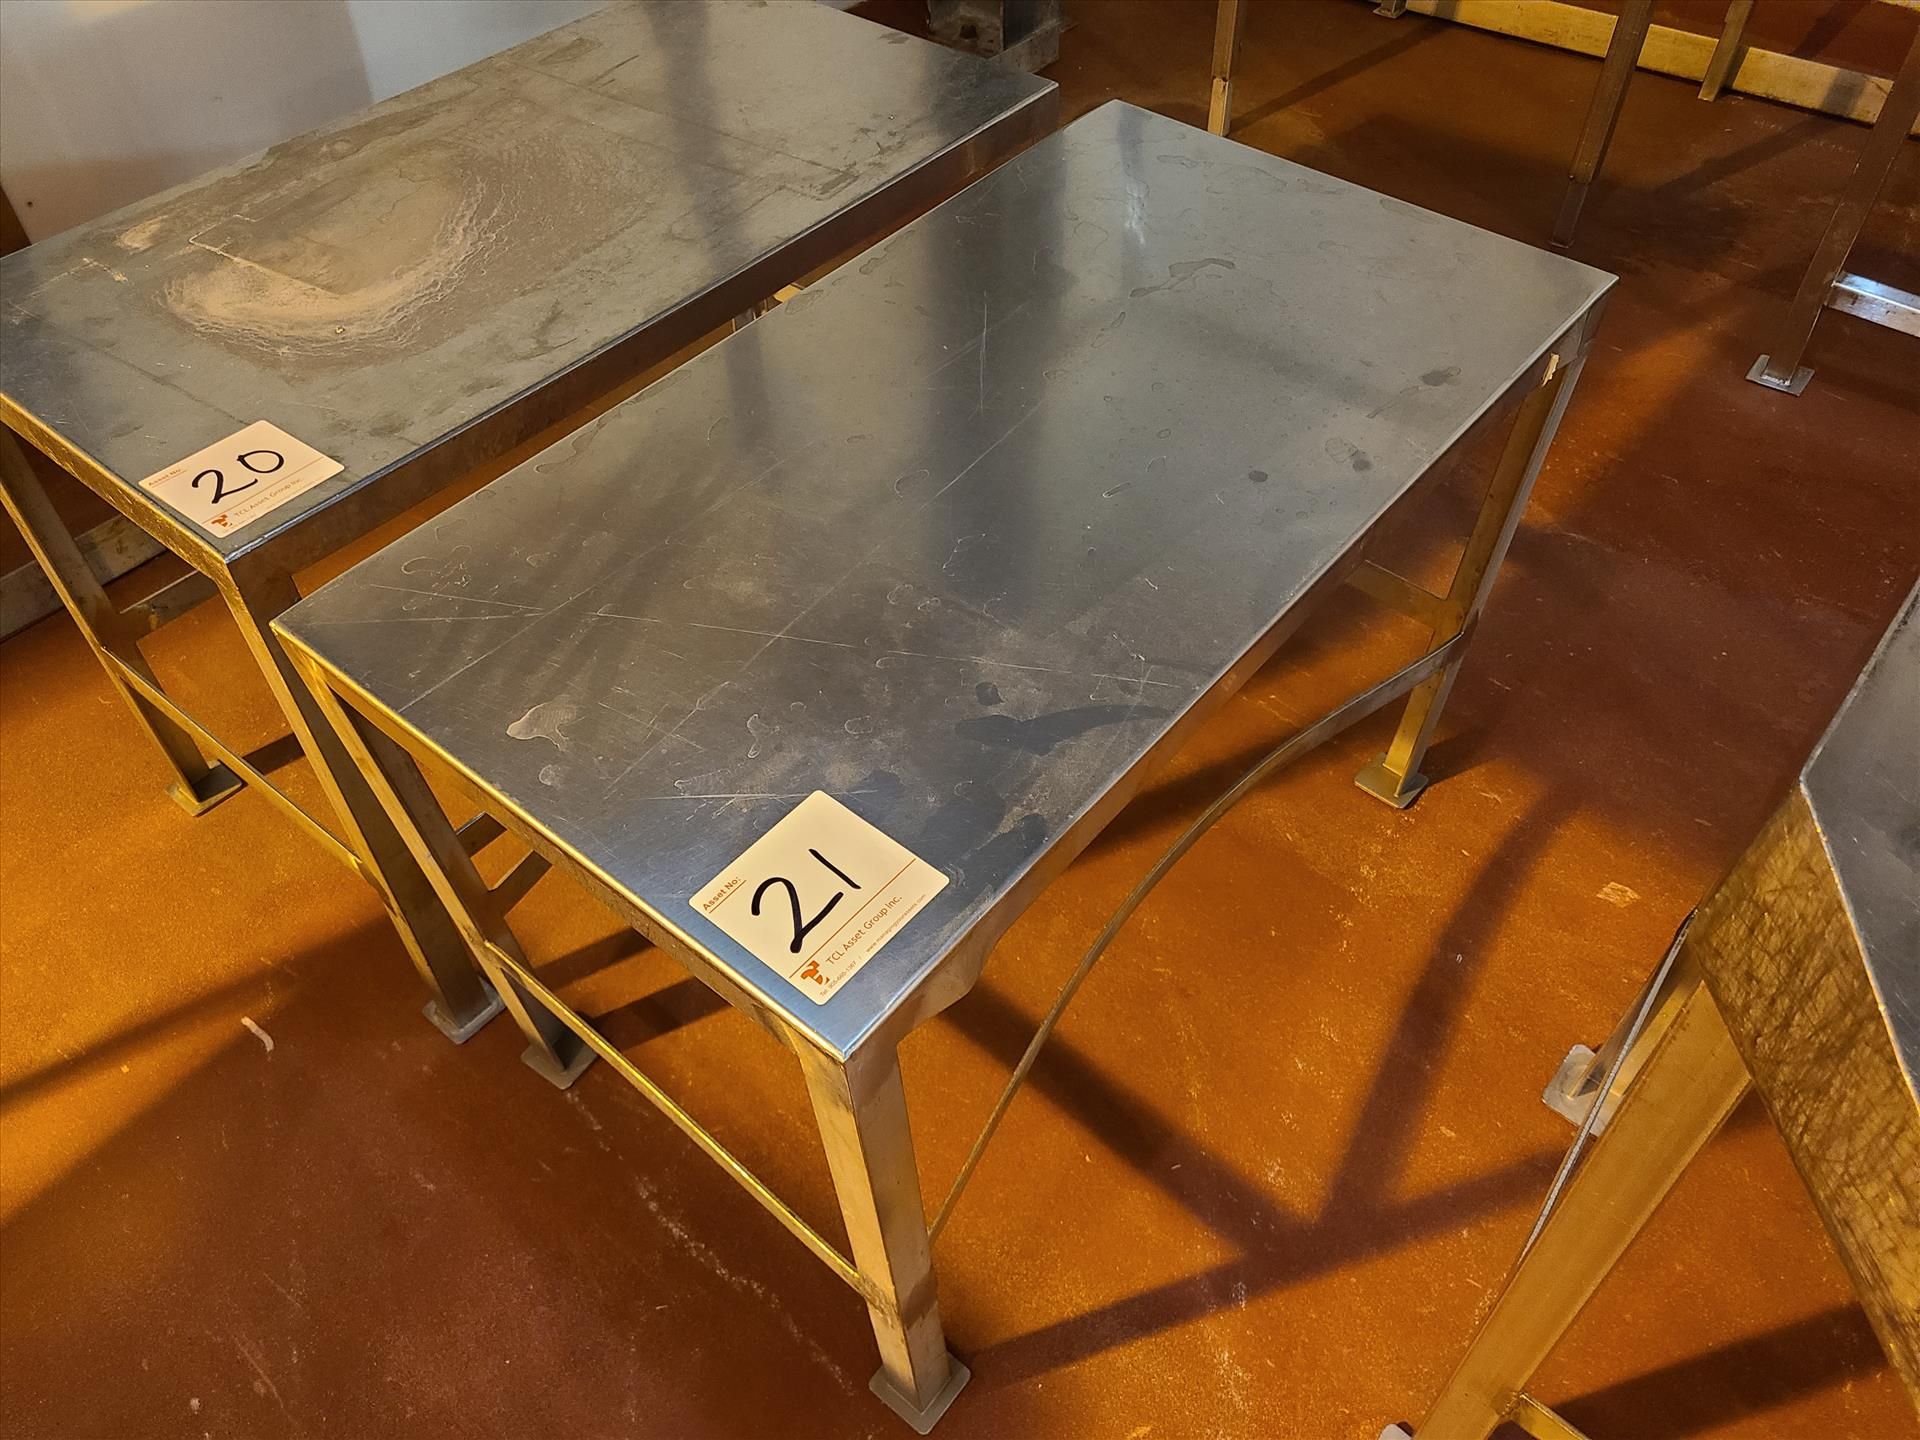 table, stainless steel, approx. 20 in. x 36 in. [Loc. Anti-Cut-Up]